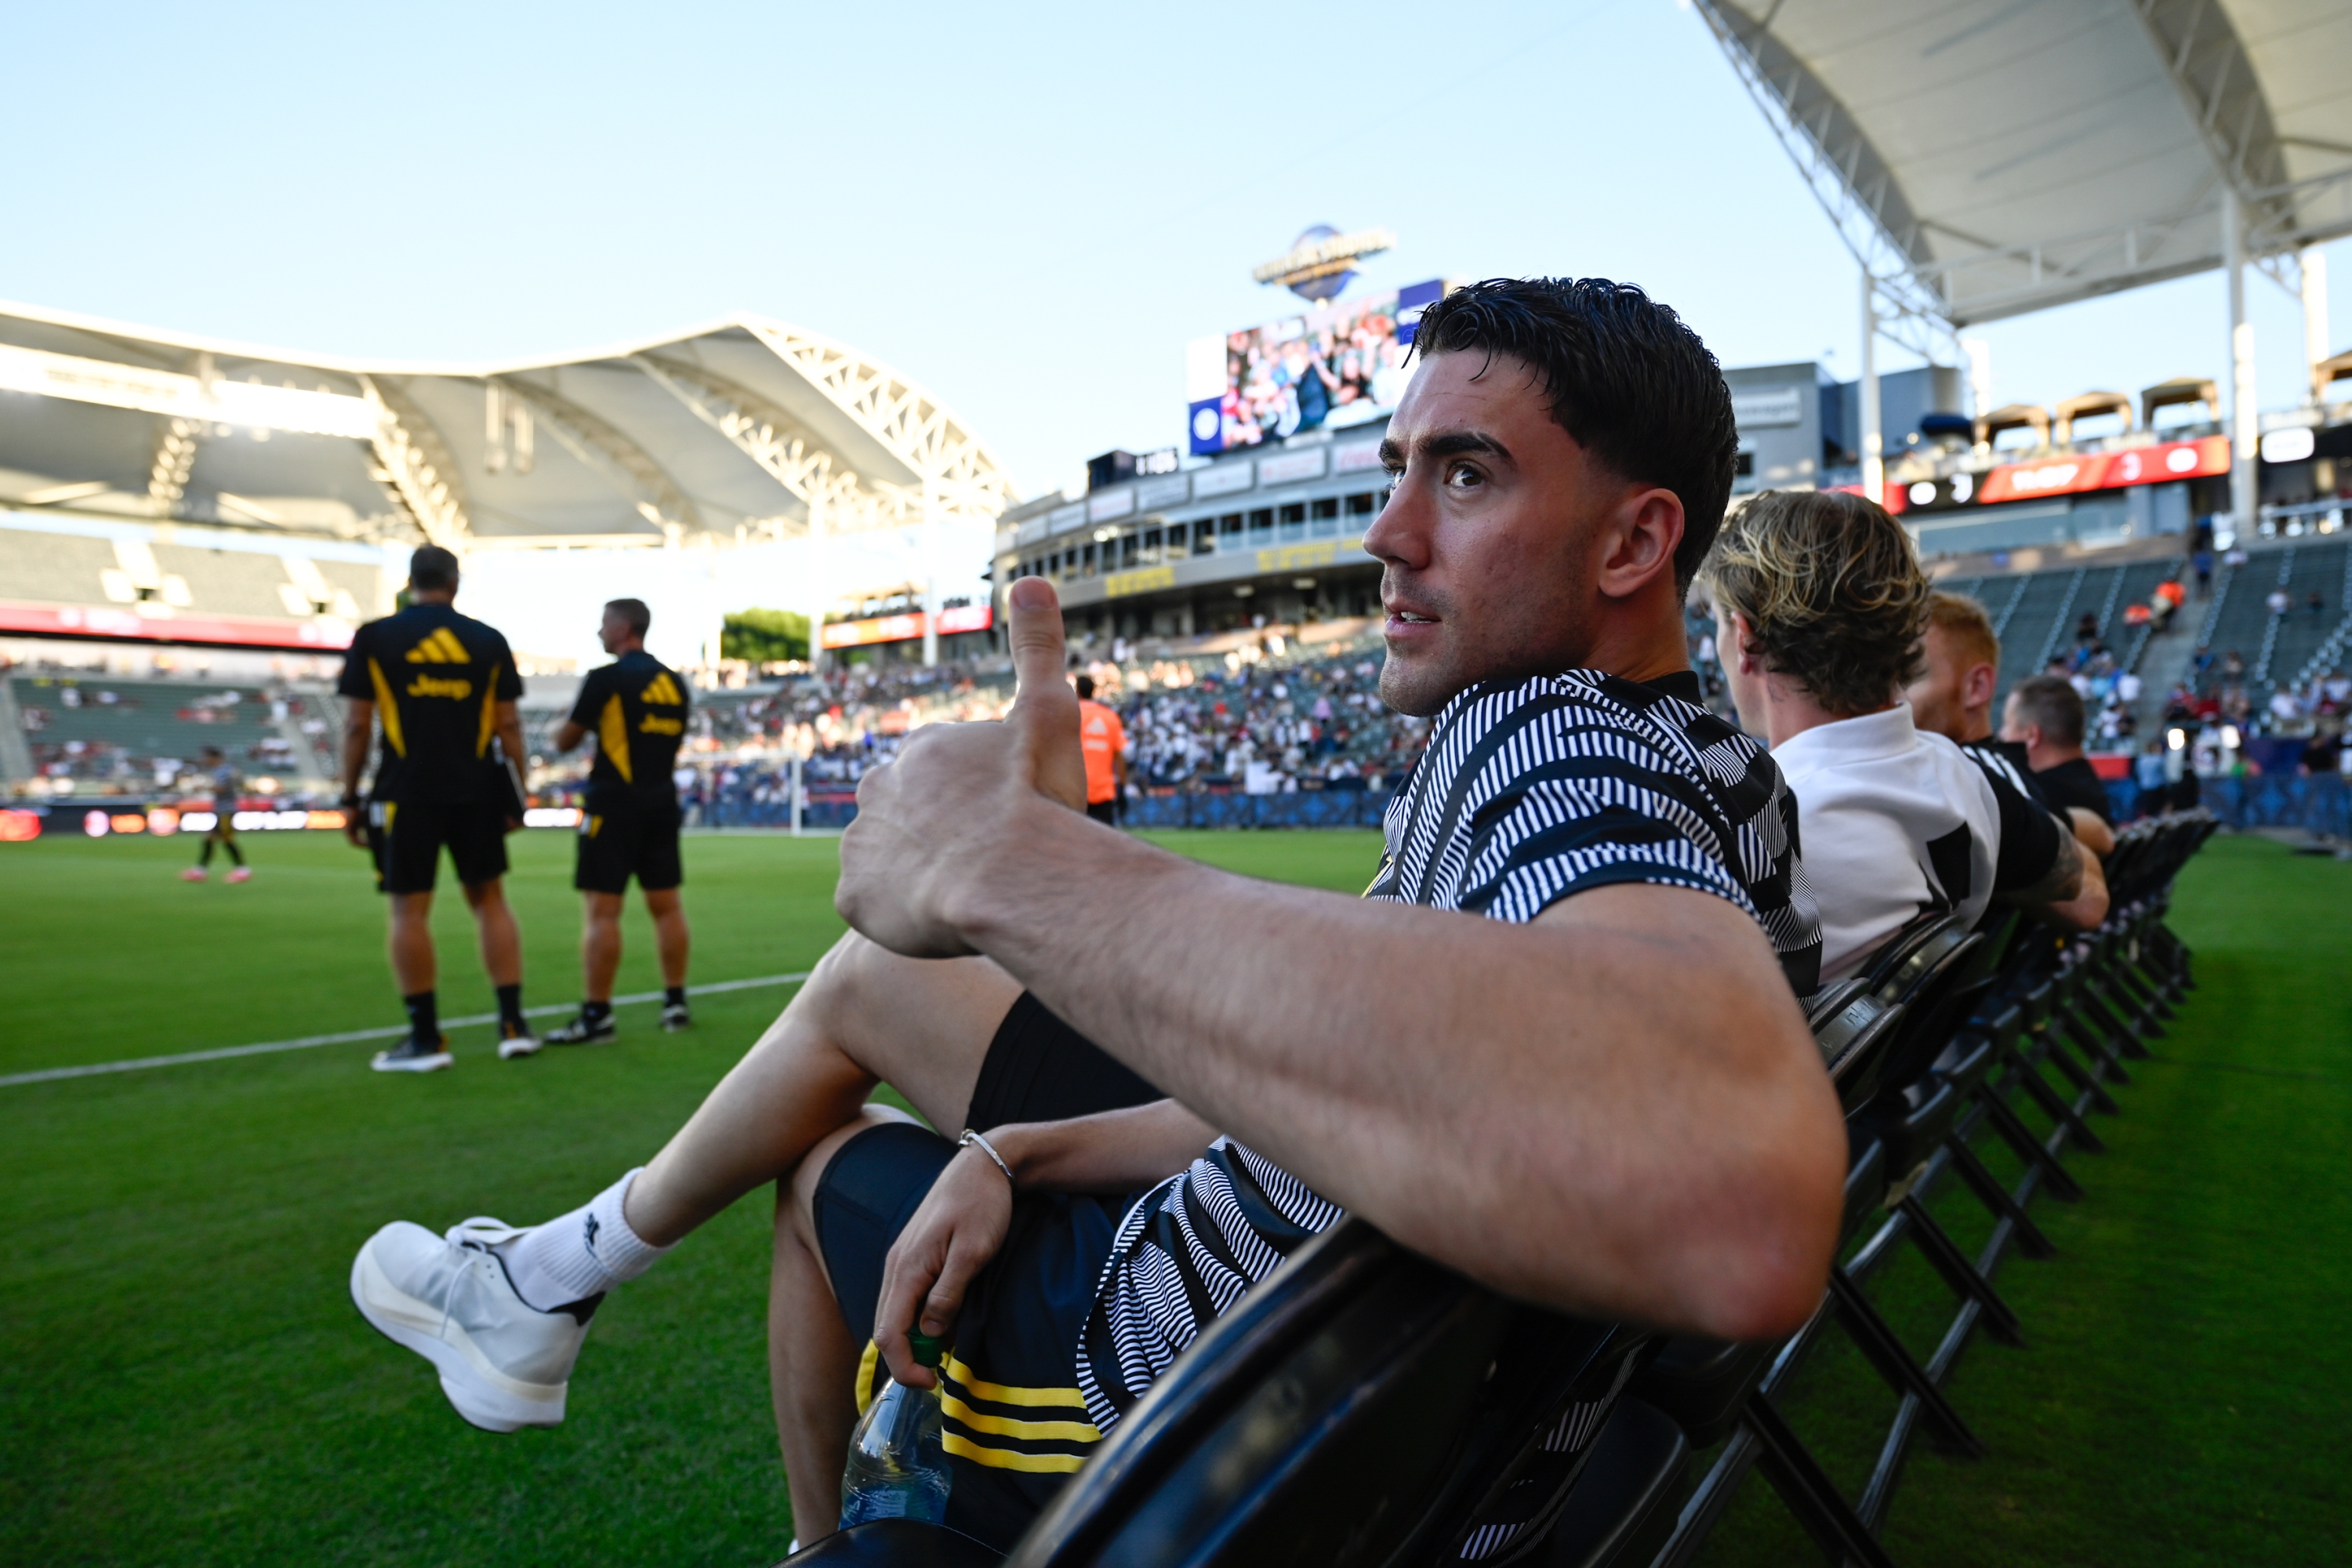 CARSON, CALIFORNIA - JULY 27: Dusan Vlahovic of Juventus gestures before the pre-season friendly match against AC Milan at Dignity Health Sports Park on July 27, 2023 in Carson, California. (Photo by Daniele Badolato - Juventus FC/Juventus FC via Getty Images)